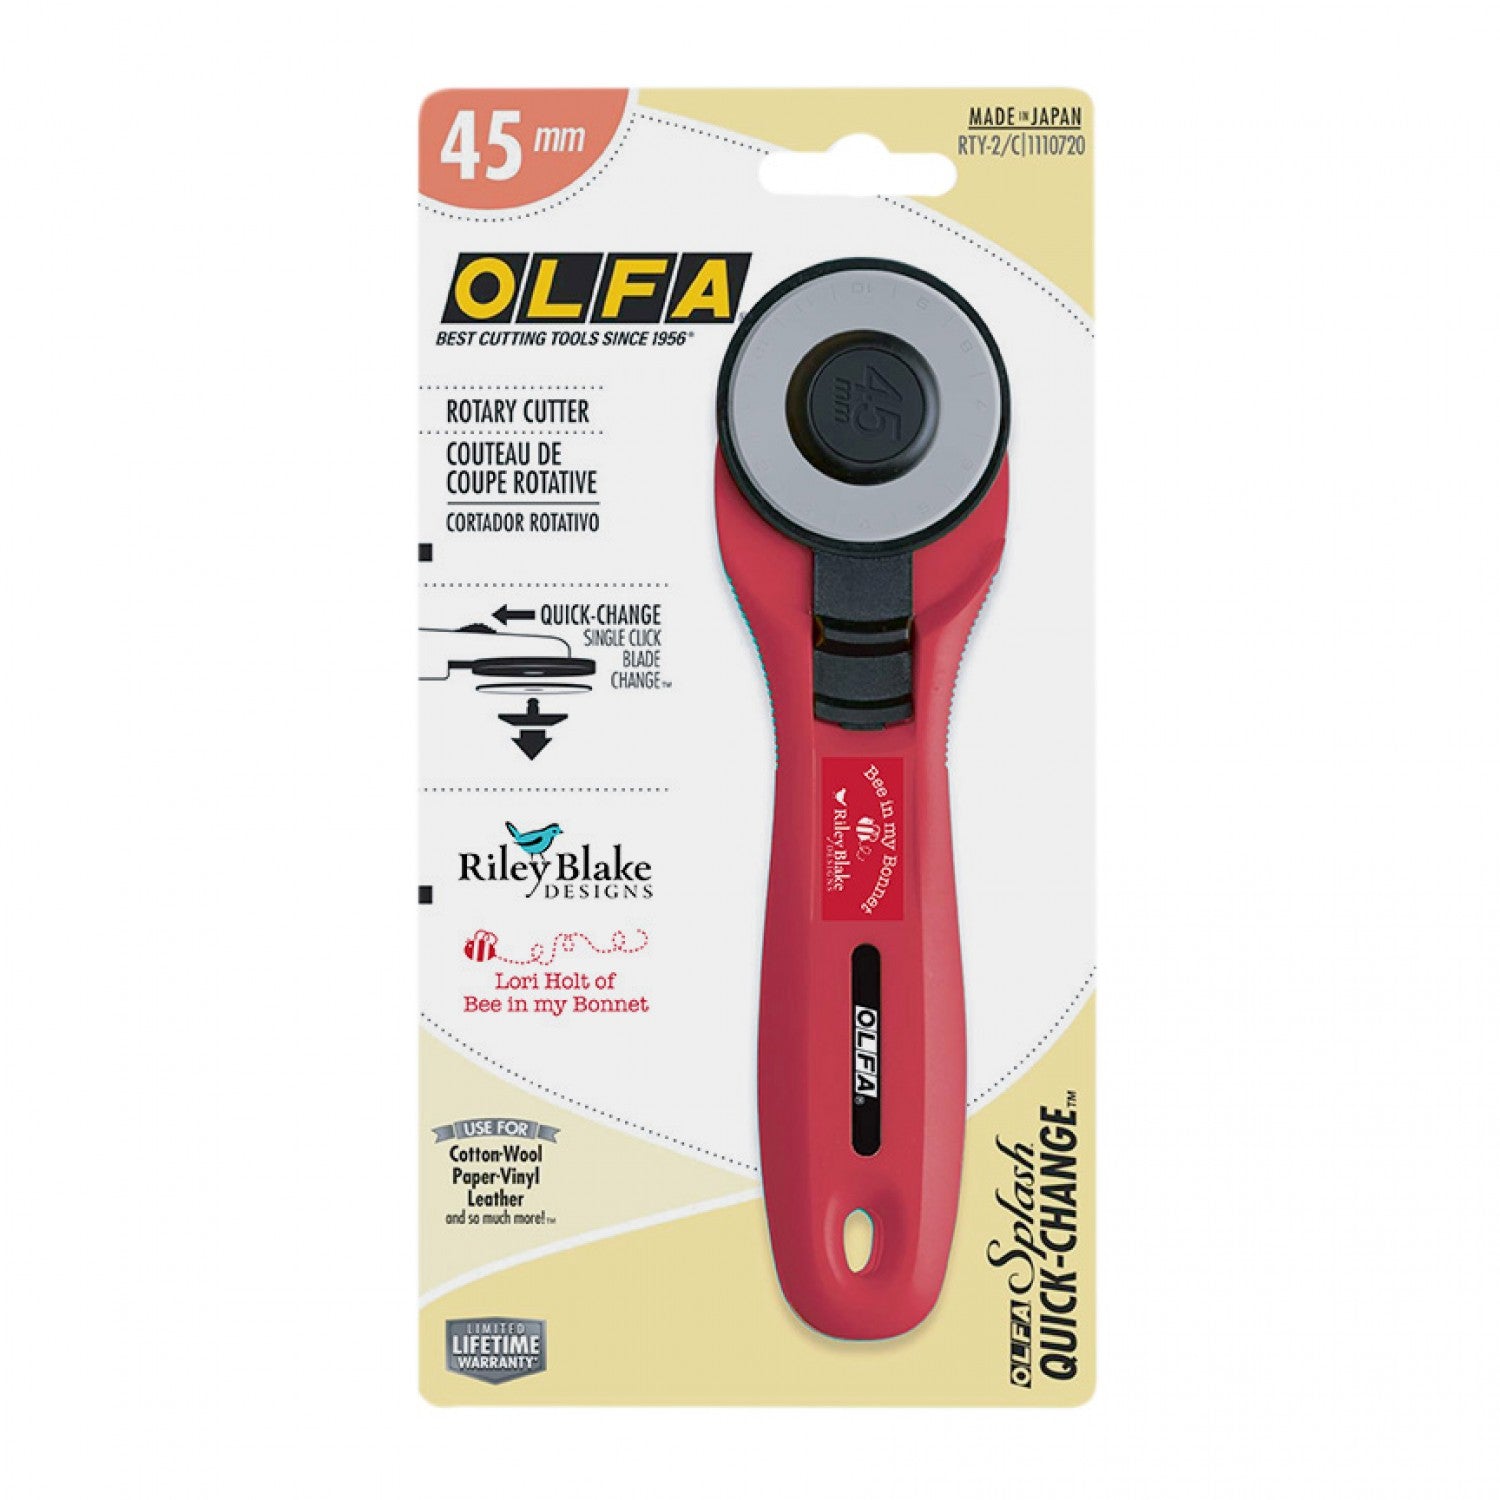 Lori Holt Red Olfa 45mm Quick Change Rotary Cutter, Olfa with Lori Holt of  Bee in my Bonnet Co. #RTY-2C-RED